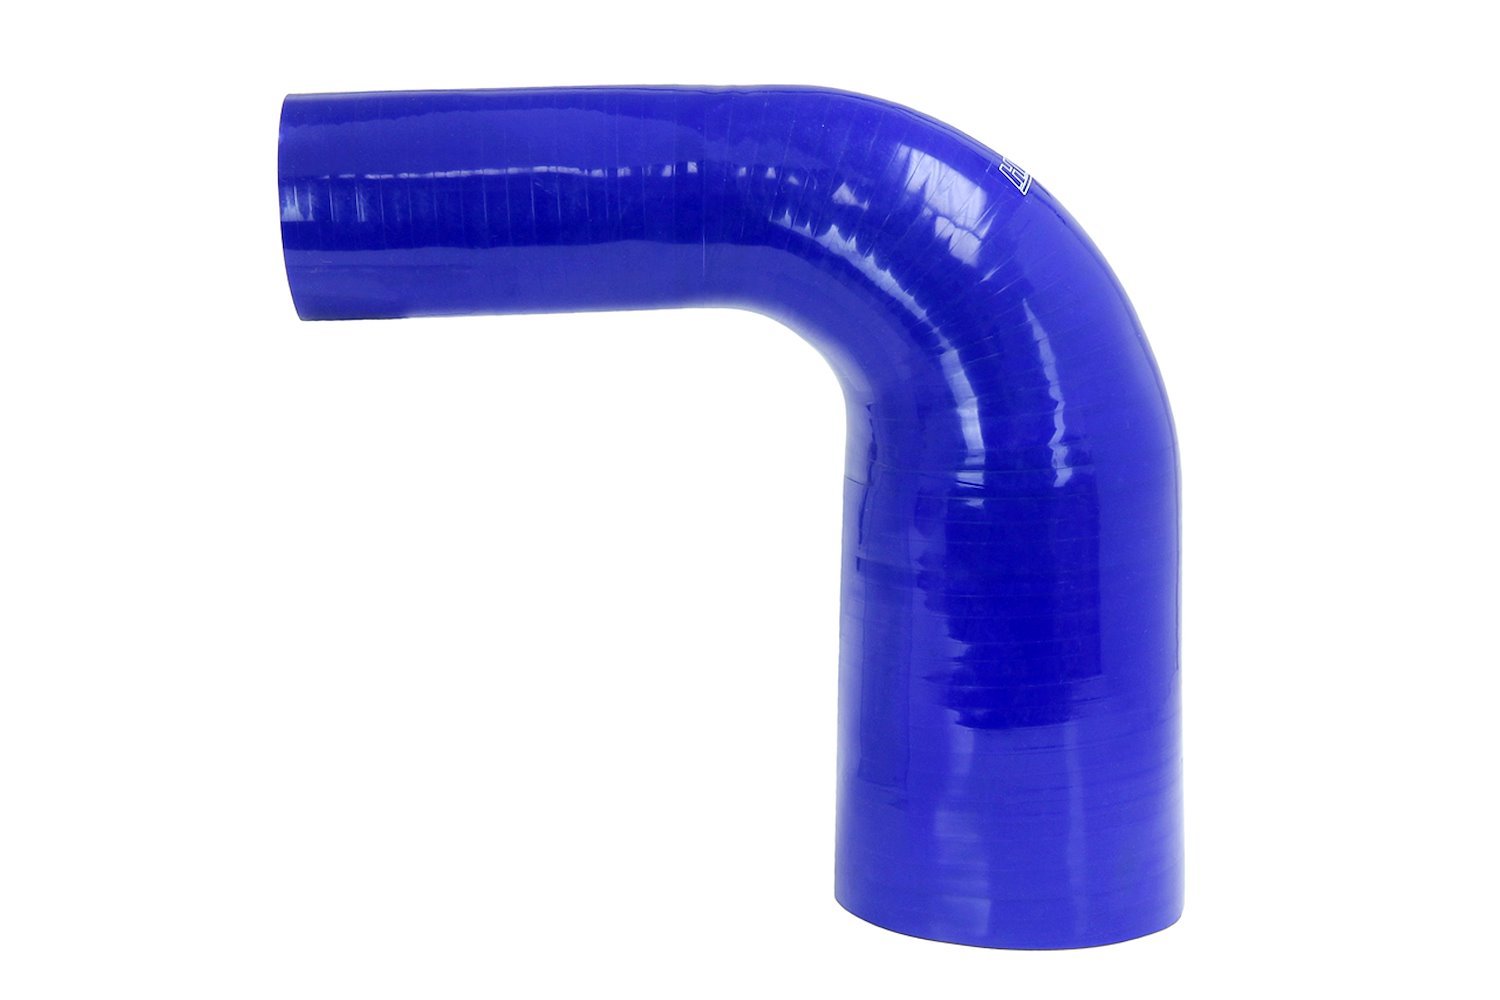 HTSER90-225-250-BLUE Silicone 90-Degree Elbow Hose, High-Temp 4-Ply Reinforced, 2-1/4 in. - 2-1/2 in. ID, Blue